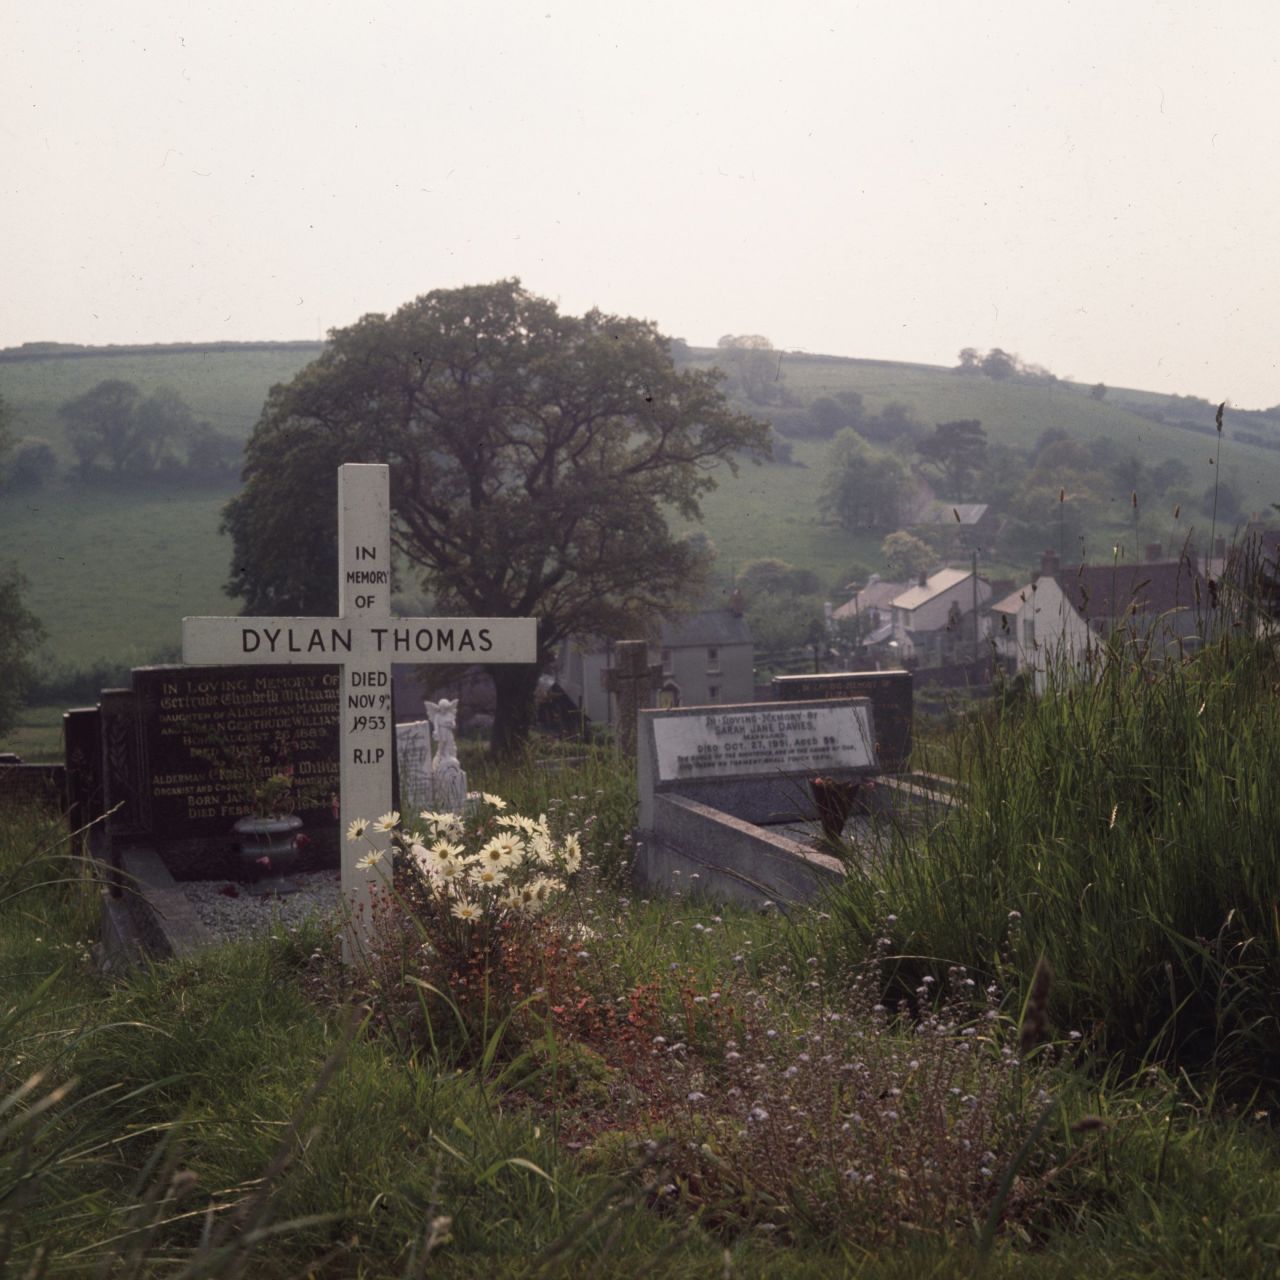 His body was brought back to Laugharne, the south Wales village which had inspired many of his most famous works, and he was buried in the local churchyard (pictured in 1969).